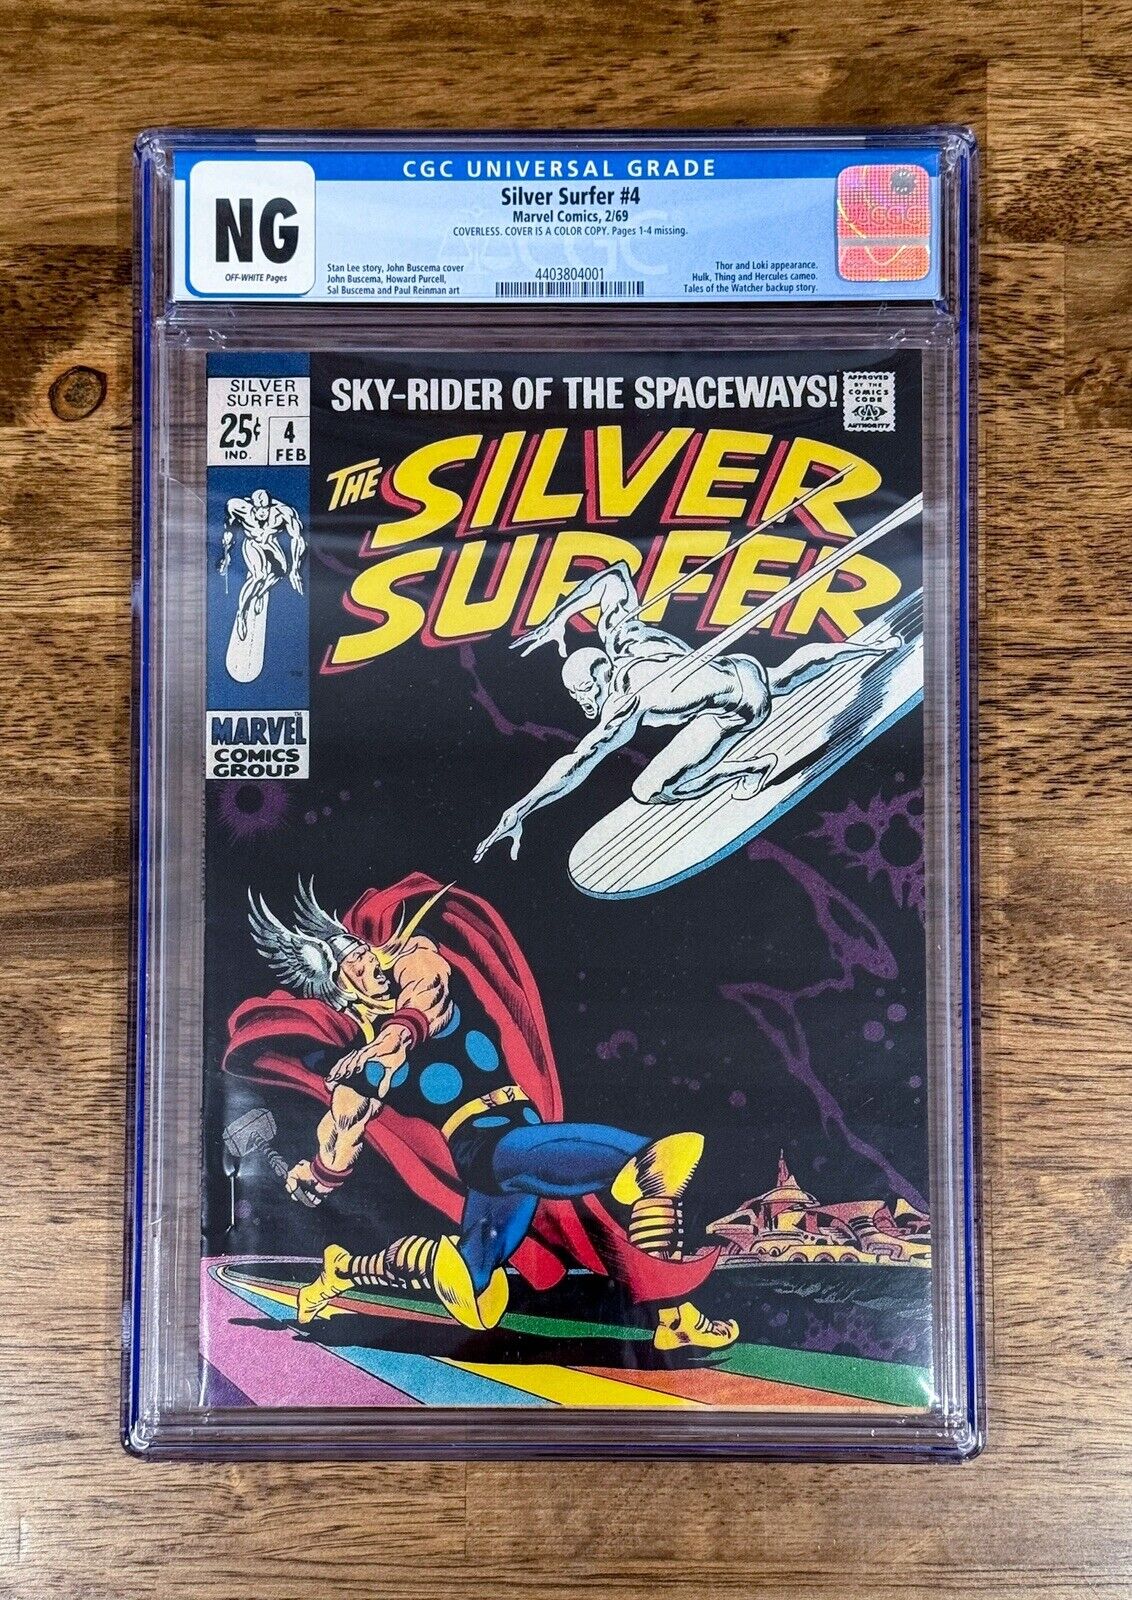 Silver Surfer 4 CGC NG Thor Iconic cover key 1969 Repro Cover Incomplete